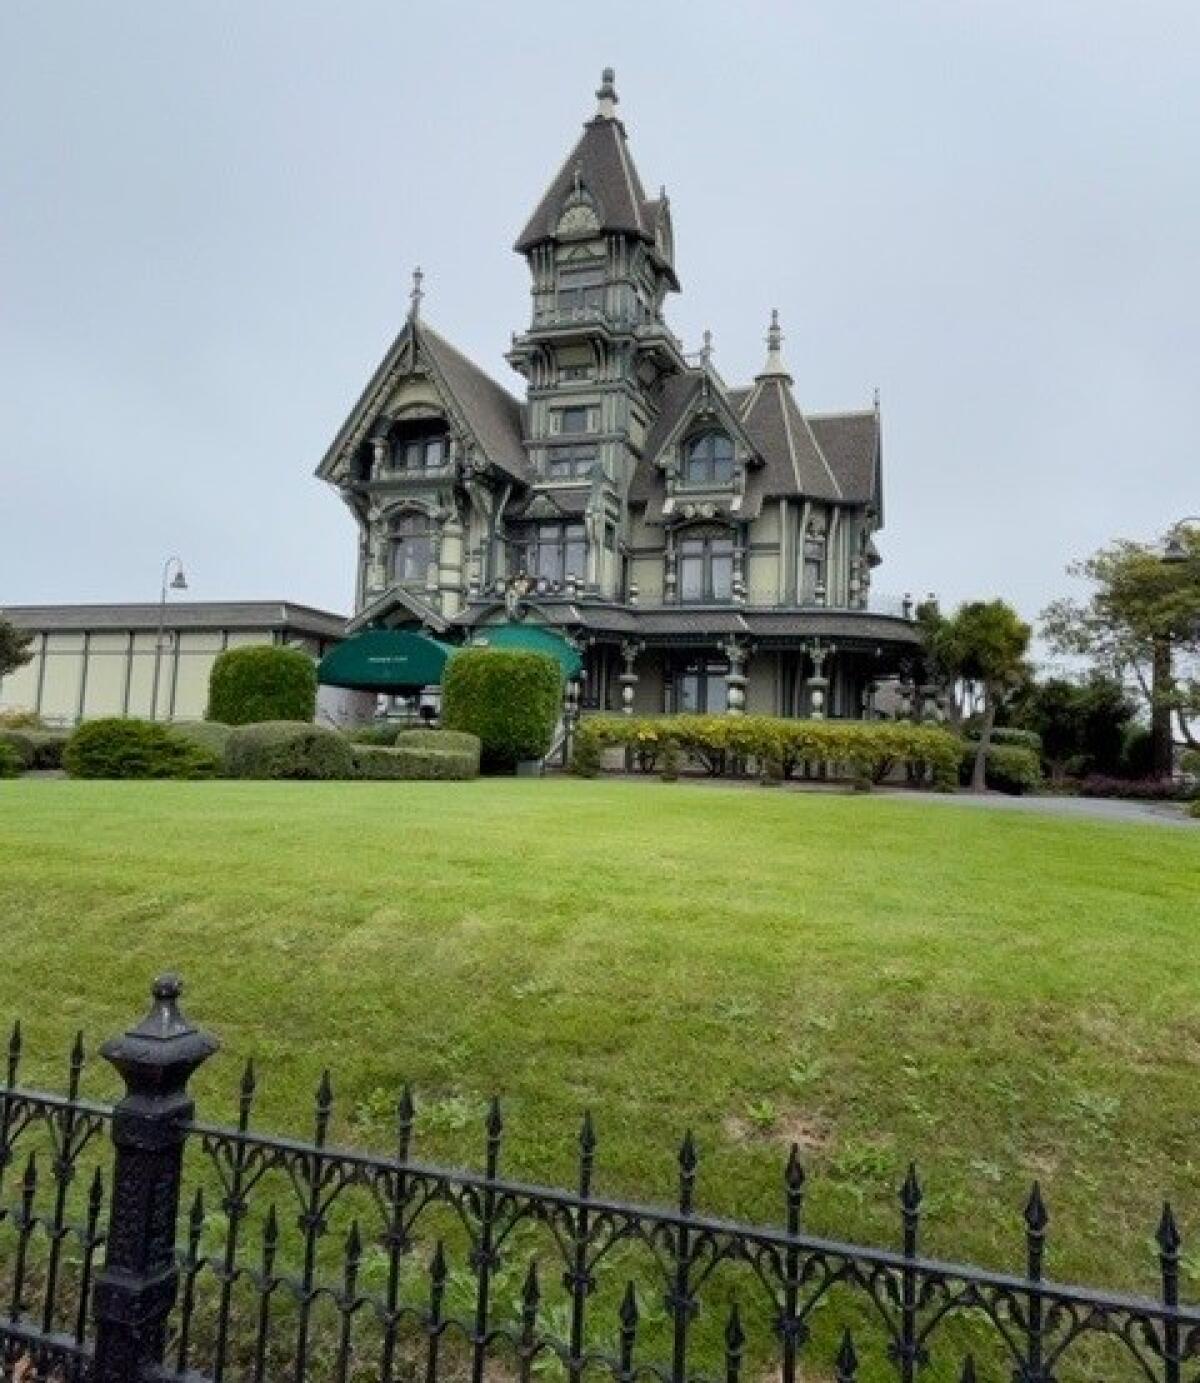 The Carson Mansion, photographed in August 2022.